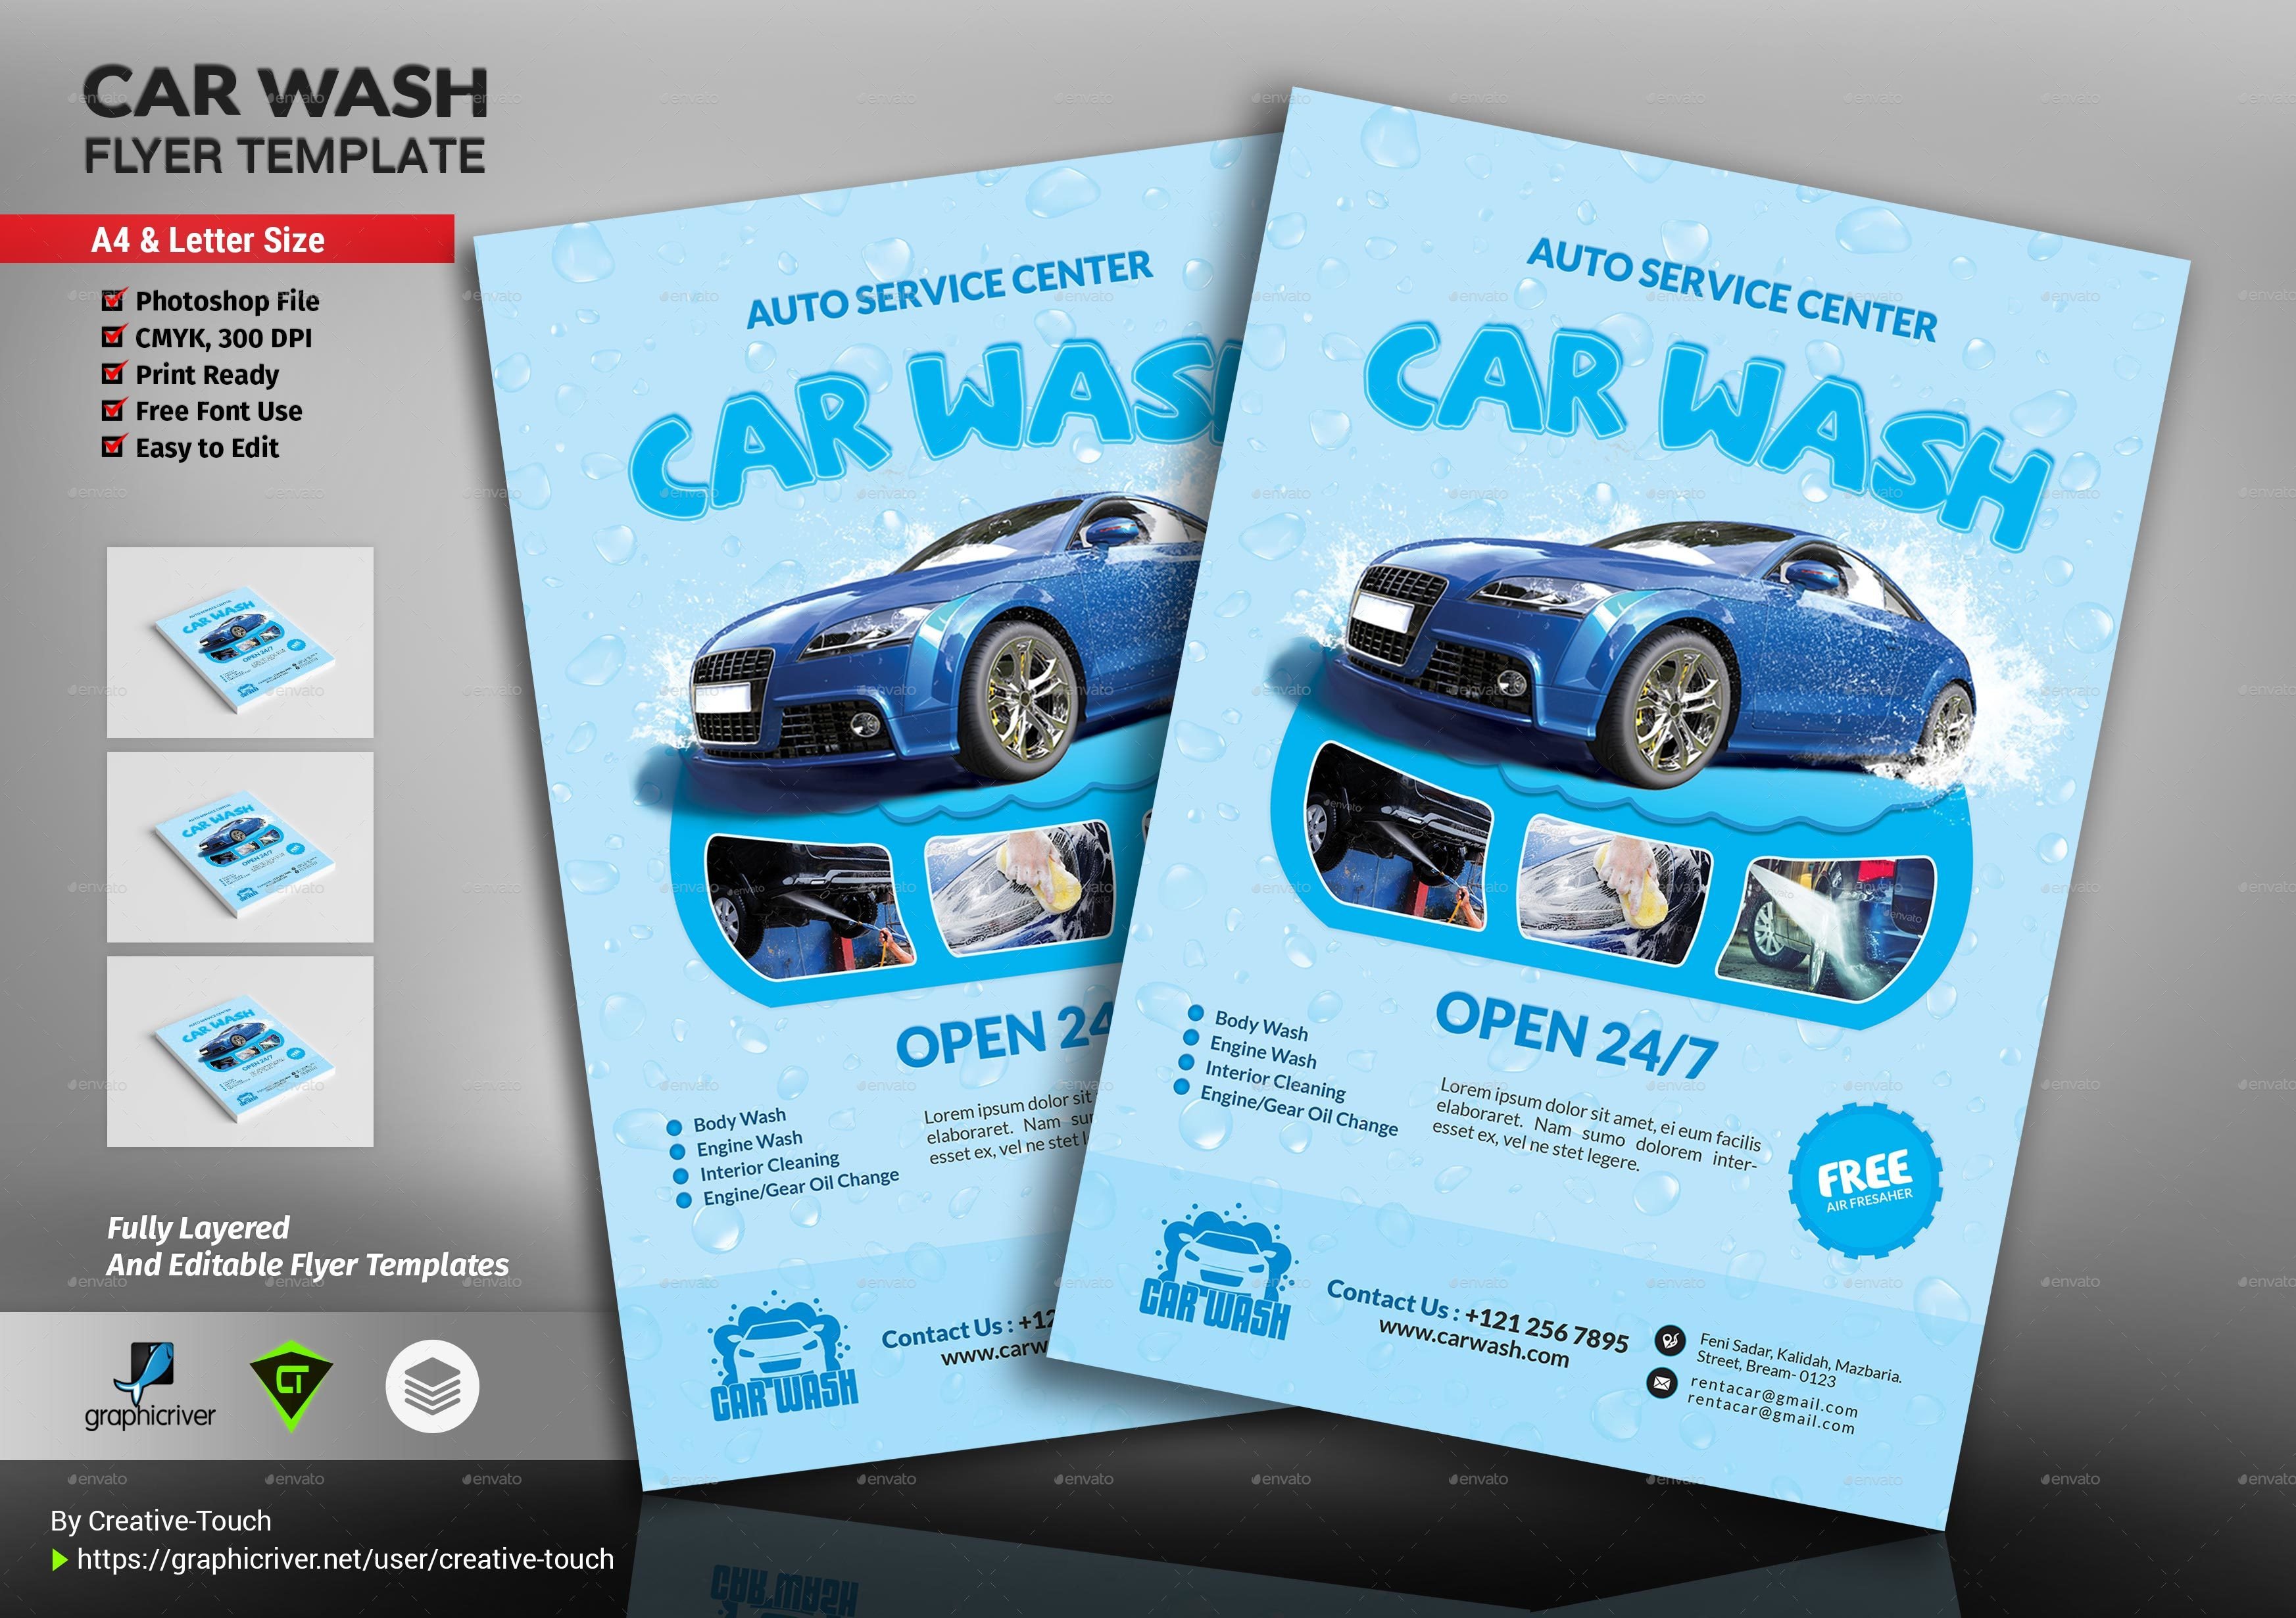 Car Wash Flyer Template by Creative Touch